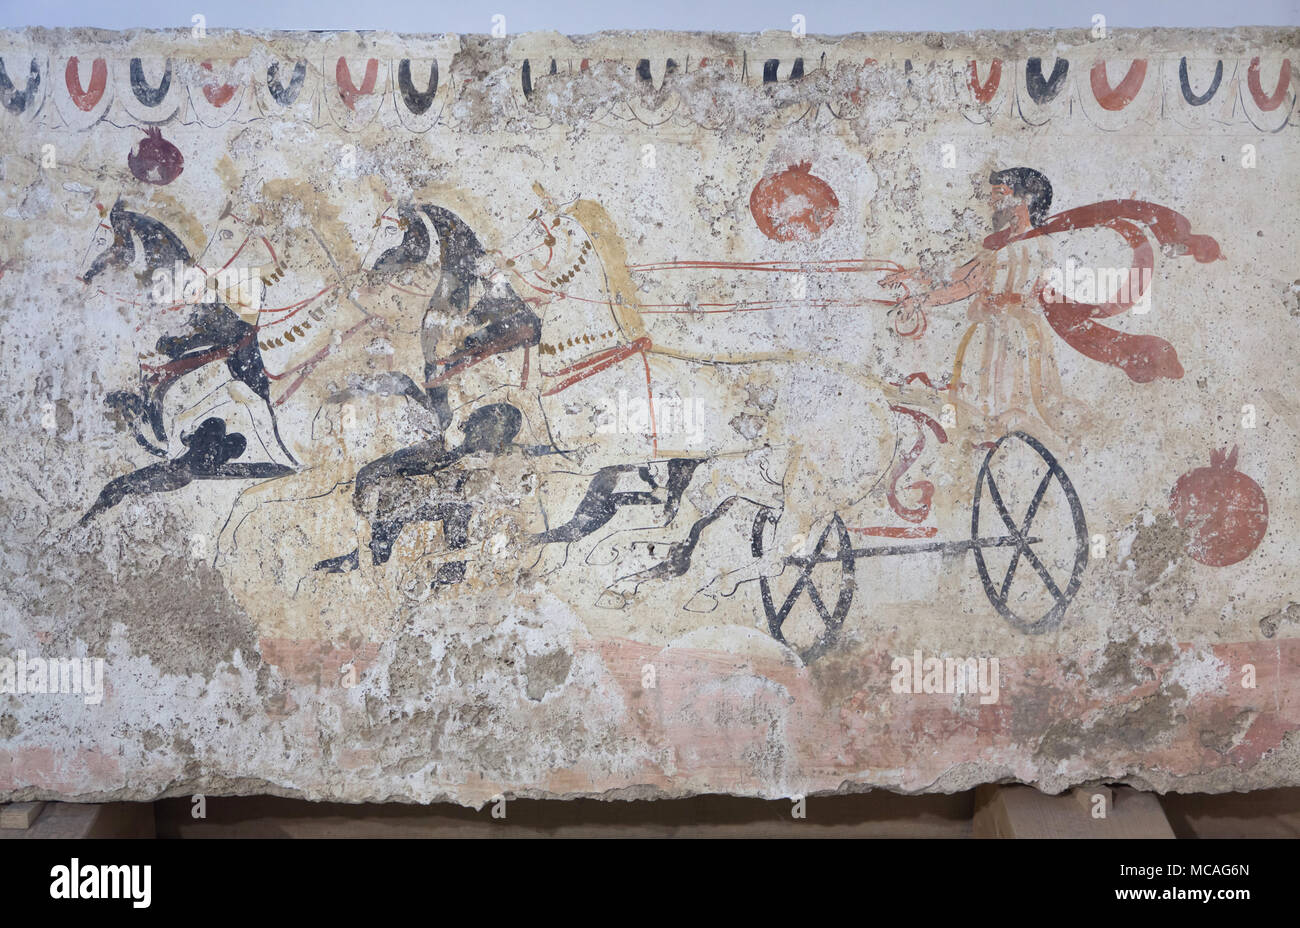 Biga race (chariot race) depicted in the Lucanian fresco from the 4th century BC on display in the Paestum Archaeological Museum (Museo archeologico di Paestum) in Paestum, Campania, Italy. Stock Photo